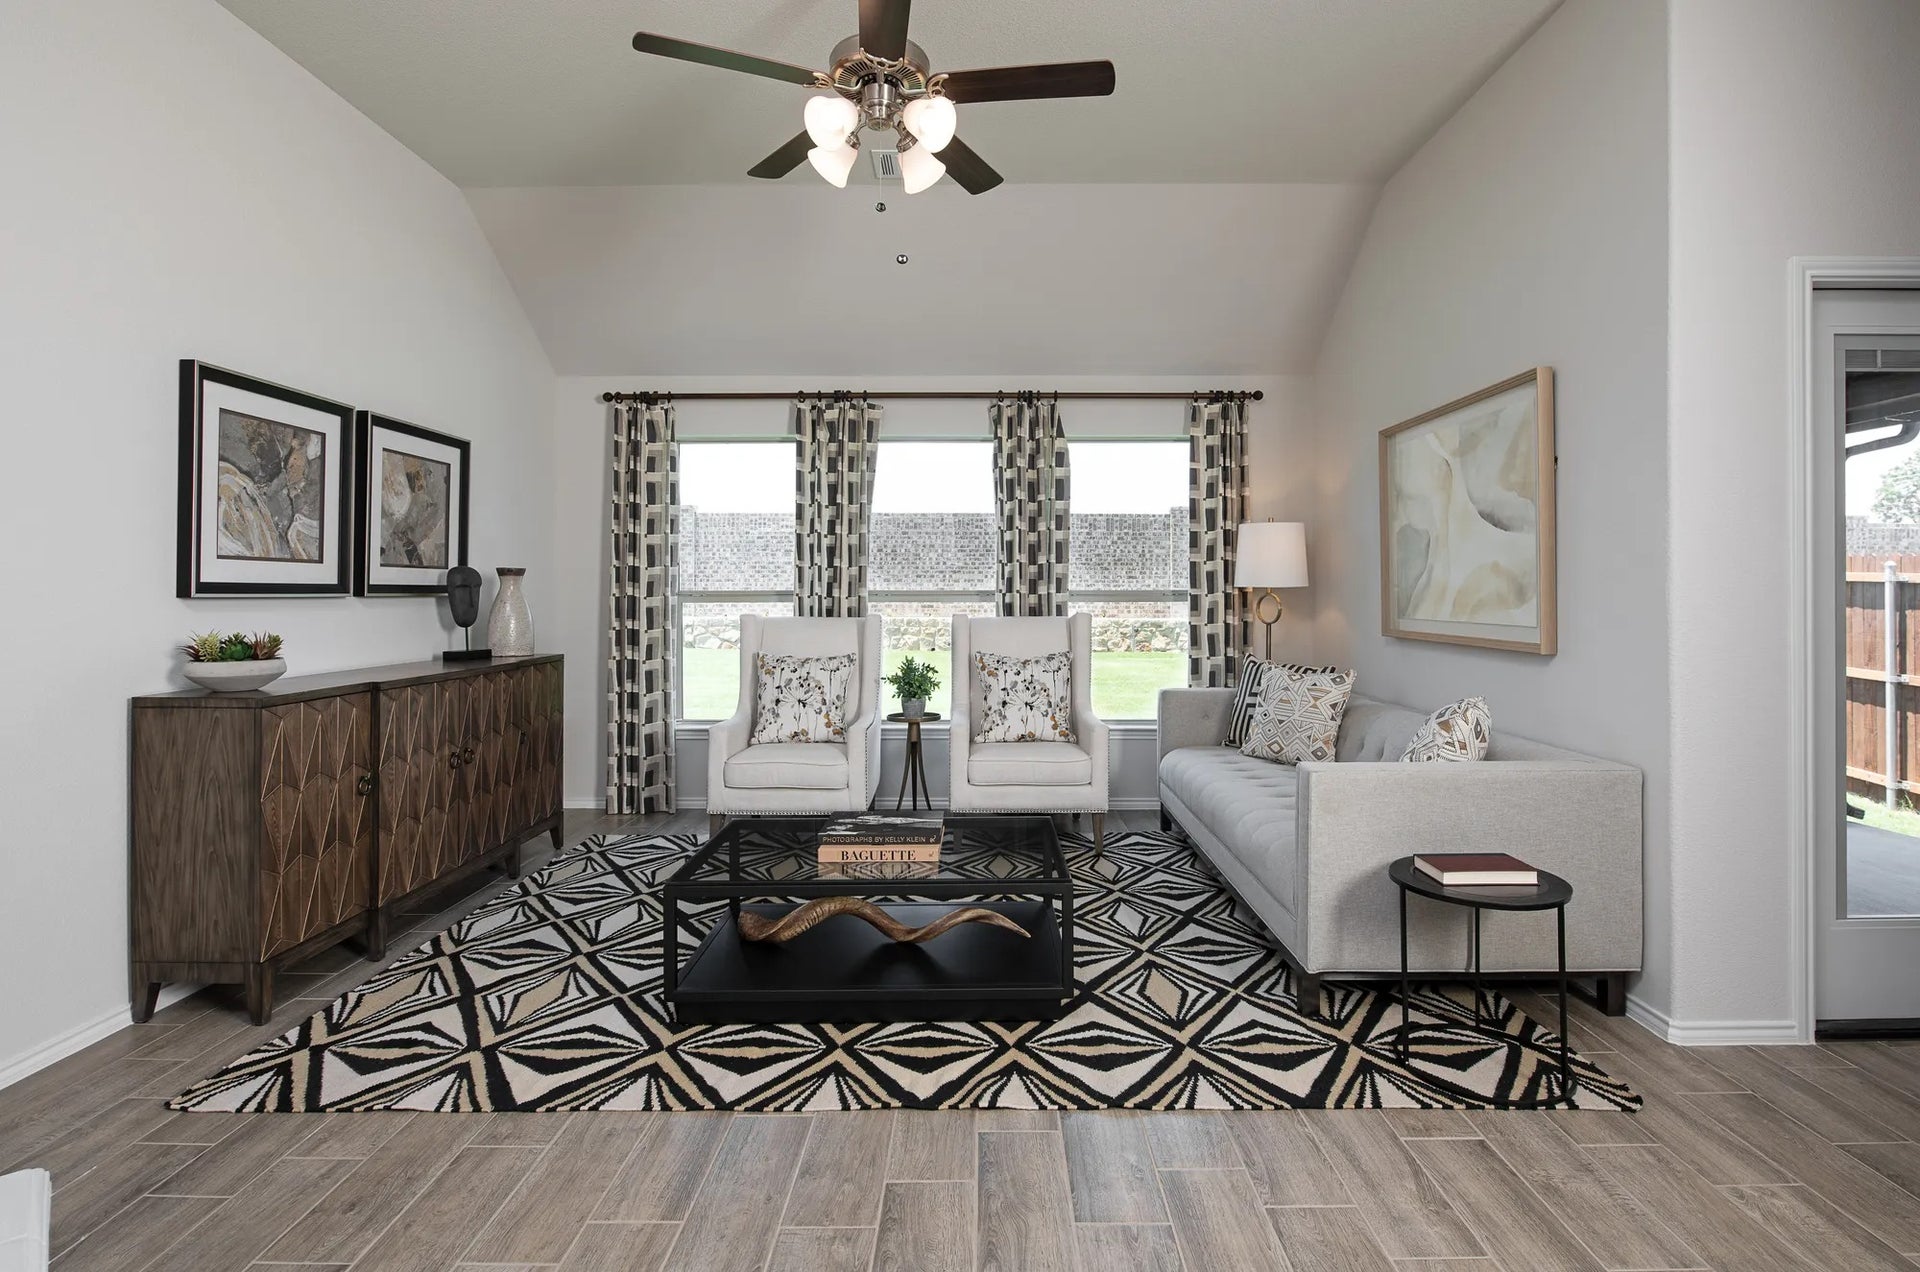 Hulen Trails New Homes in Fort Worth, TX